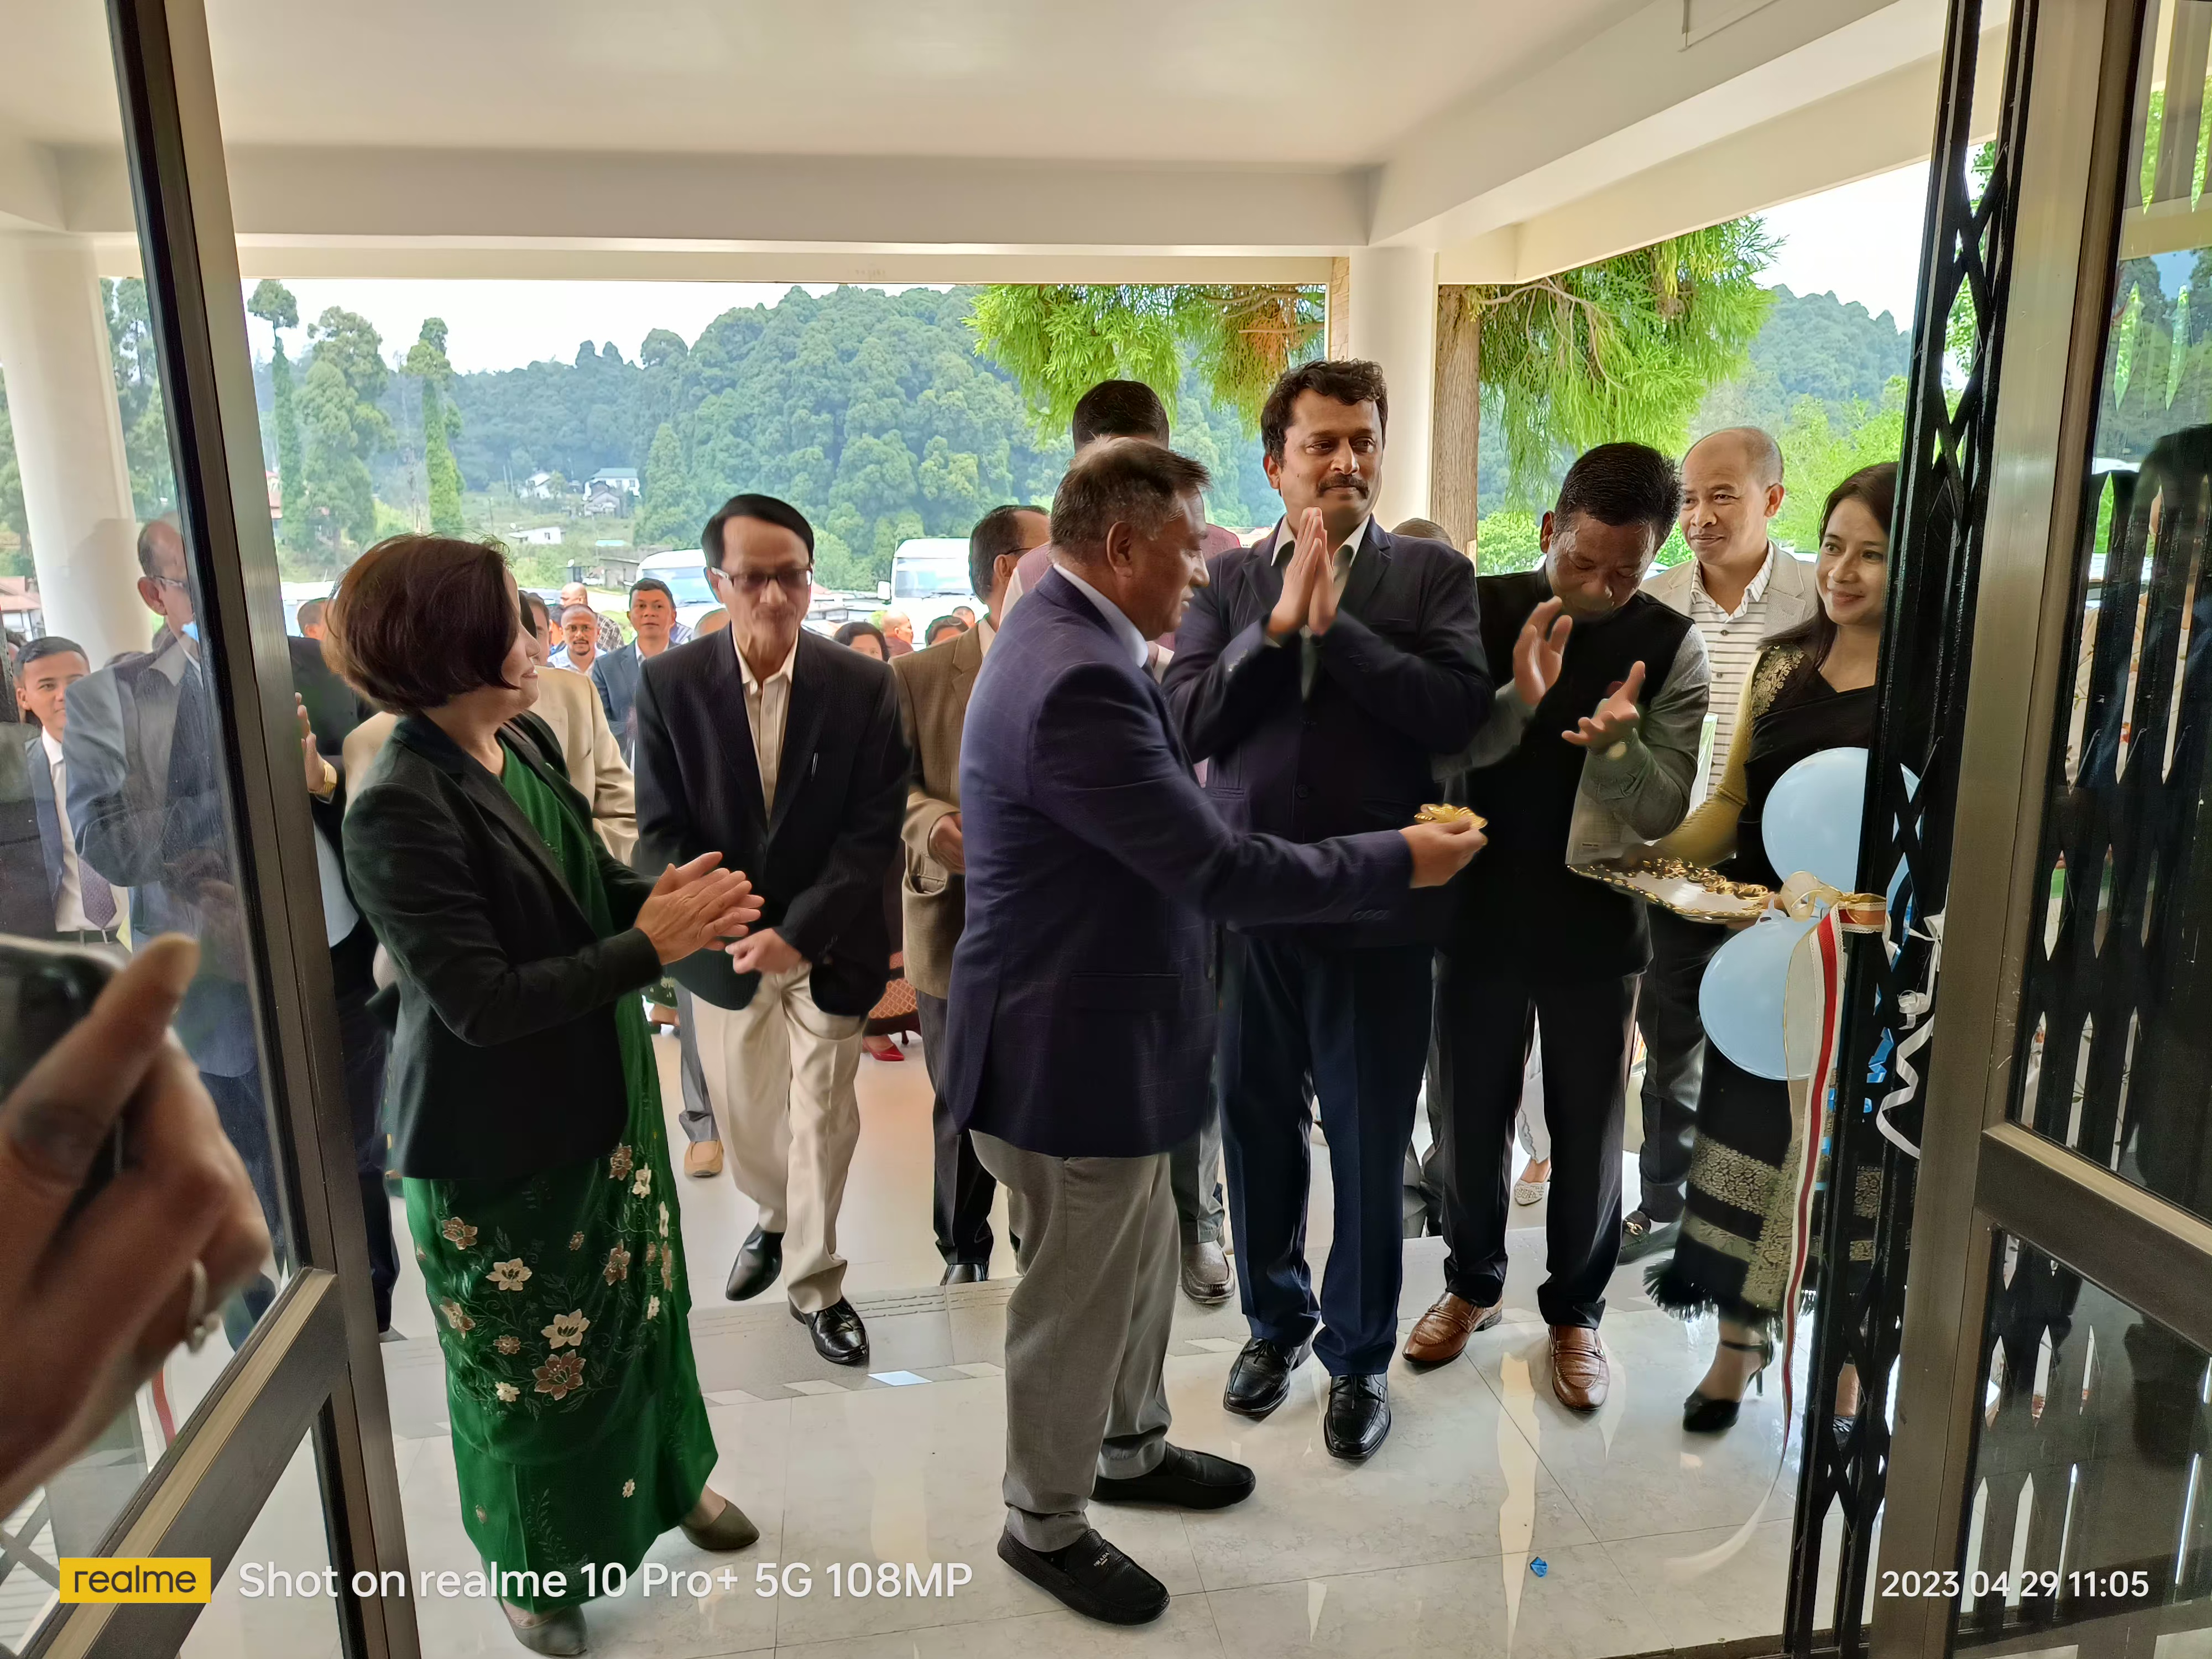 Inauguration of Indo Dan Multipurpose Hall and Guest House, Upper Shillong on 29th April 2023